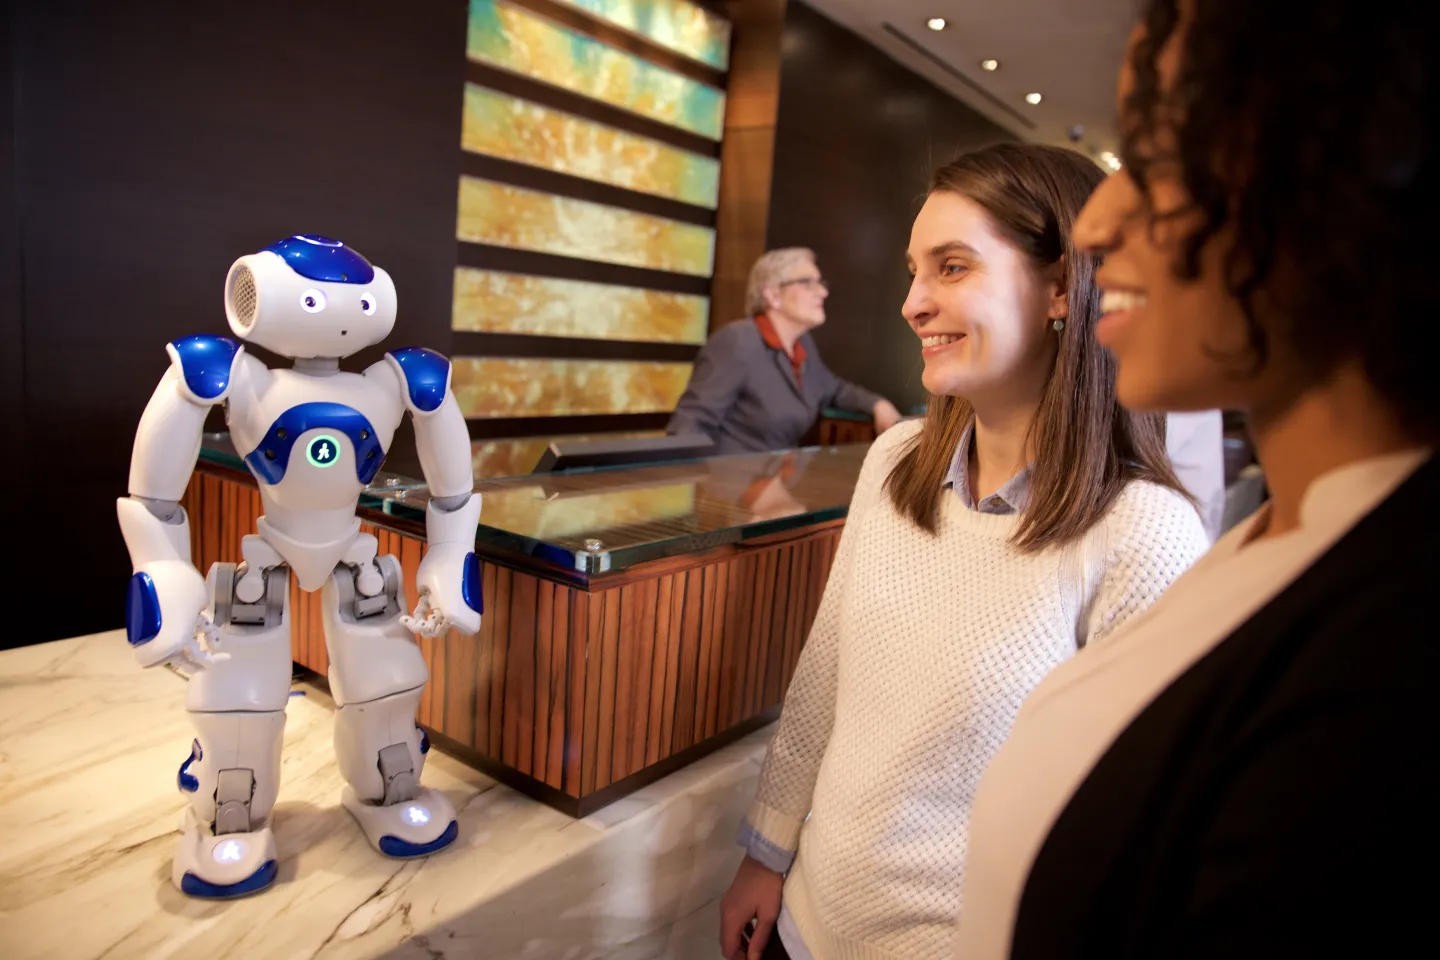 Some guests at Hilton chatting with the IBM Watson robot